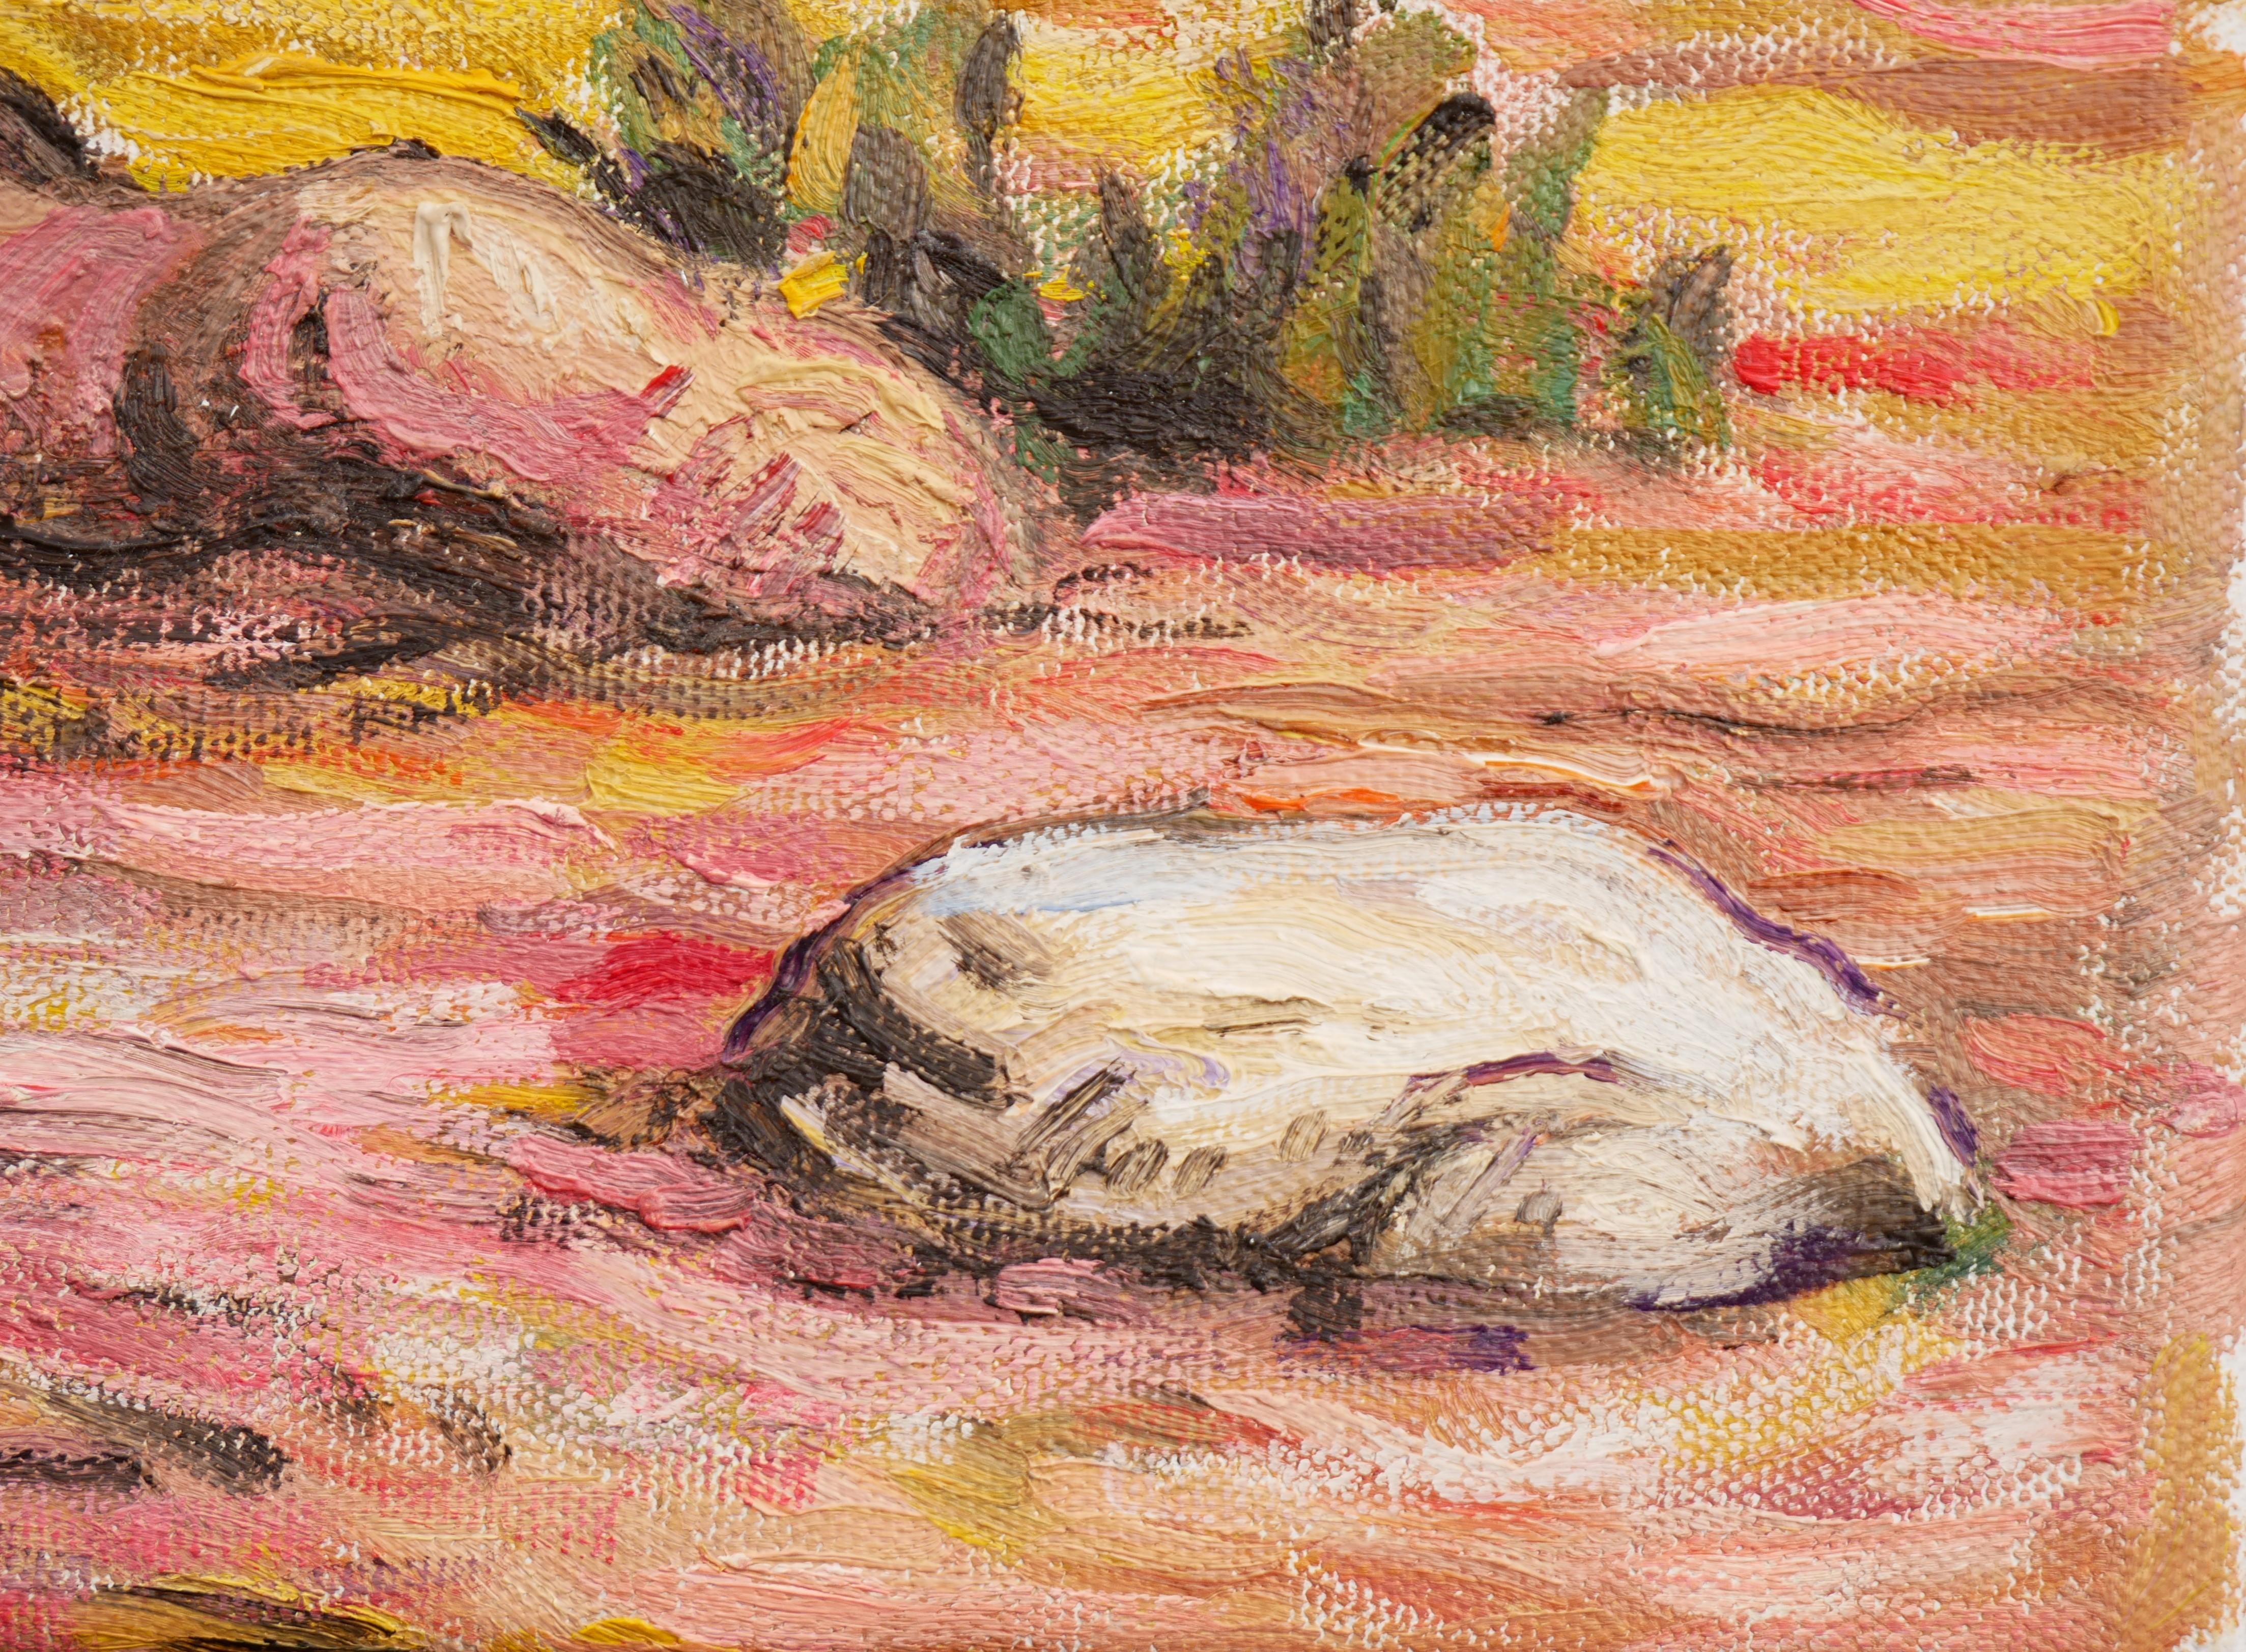 Colorful, pastel-toned painting by contemporary artist Henry David Potwin. This work features a pink and yellow-toned landscape scene with a skull sitting at the bottom of a tree, contemplating a stone nearby. Signed at bottom left corner. Titled